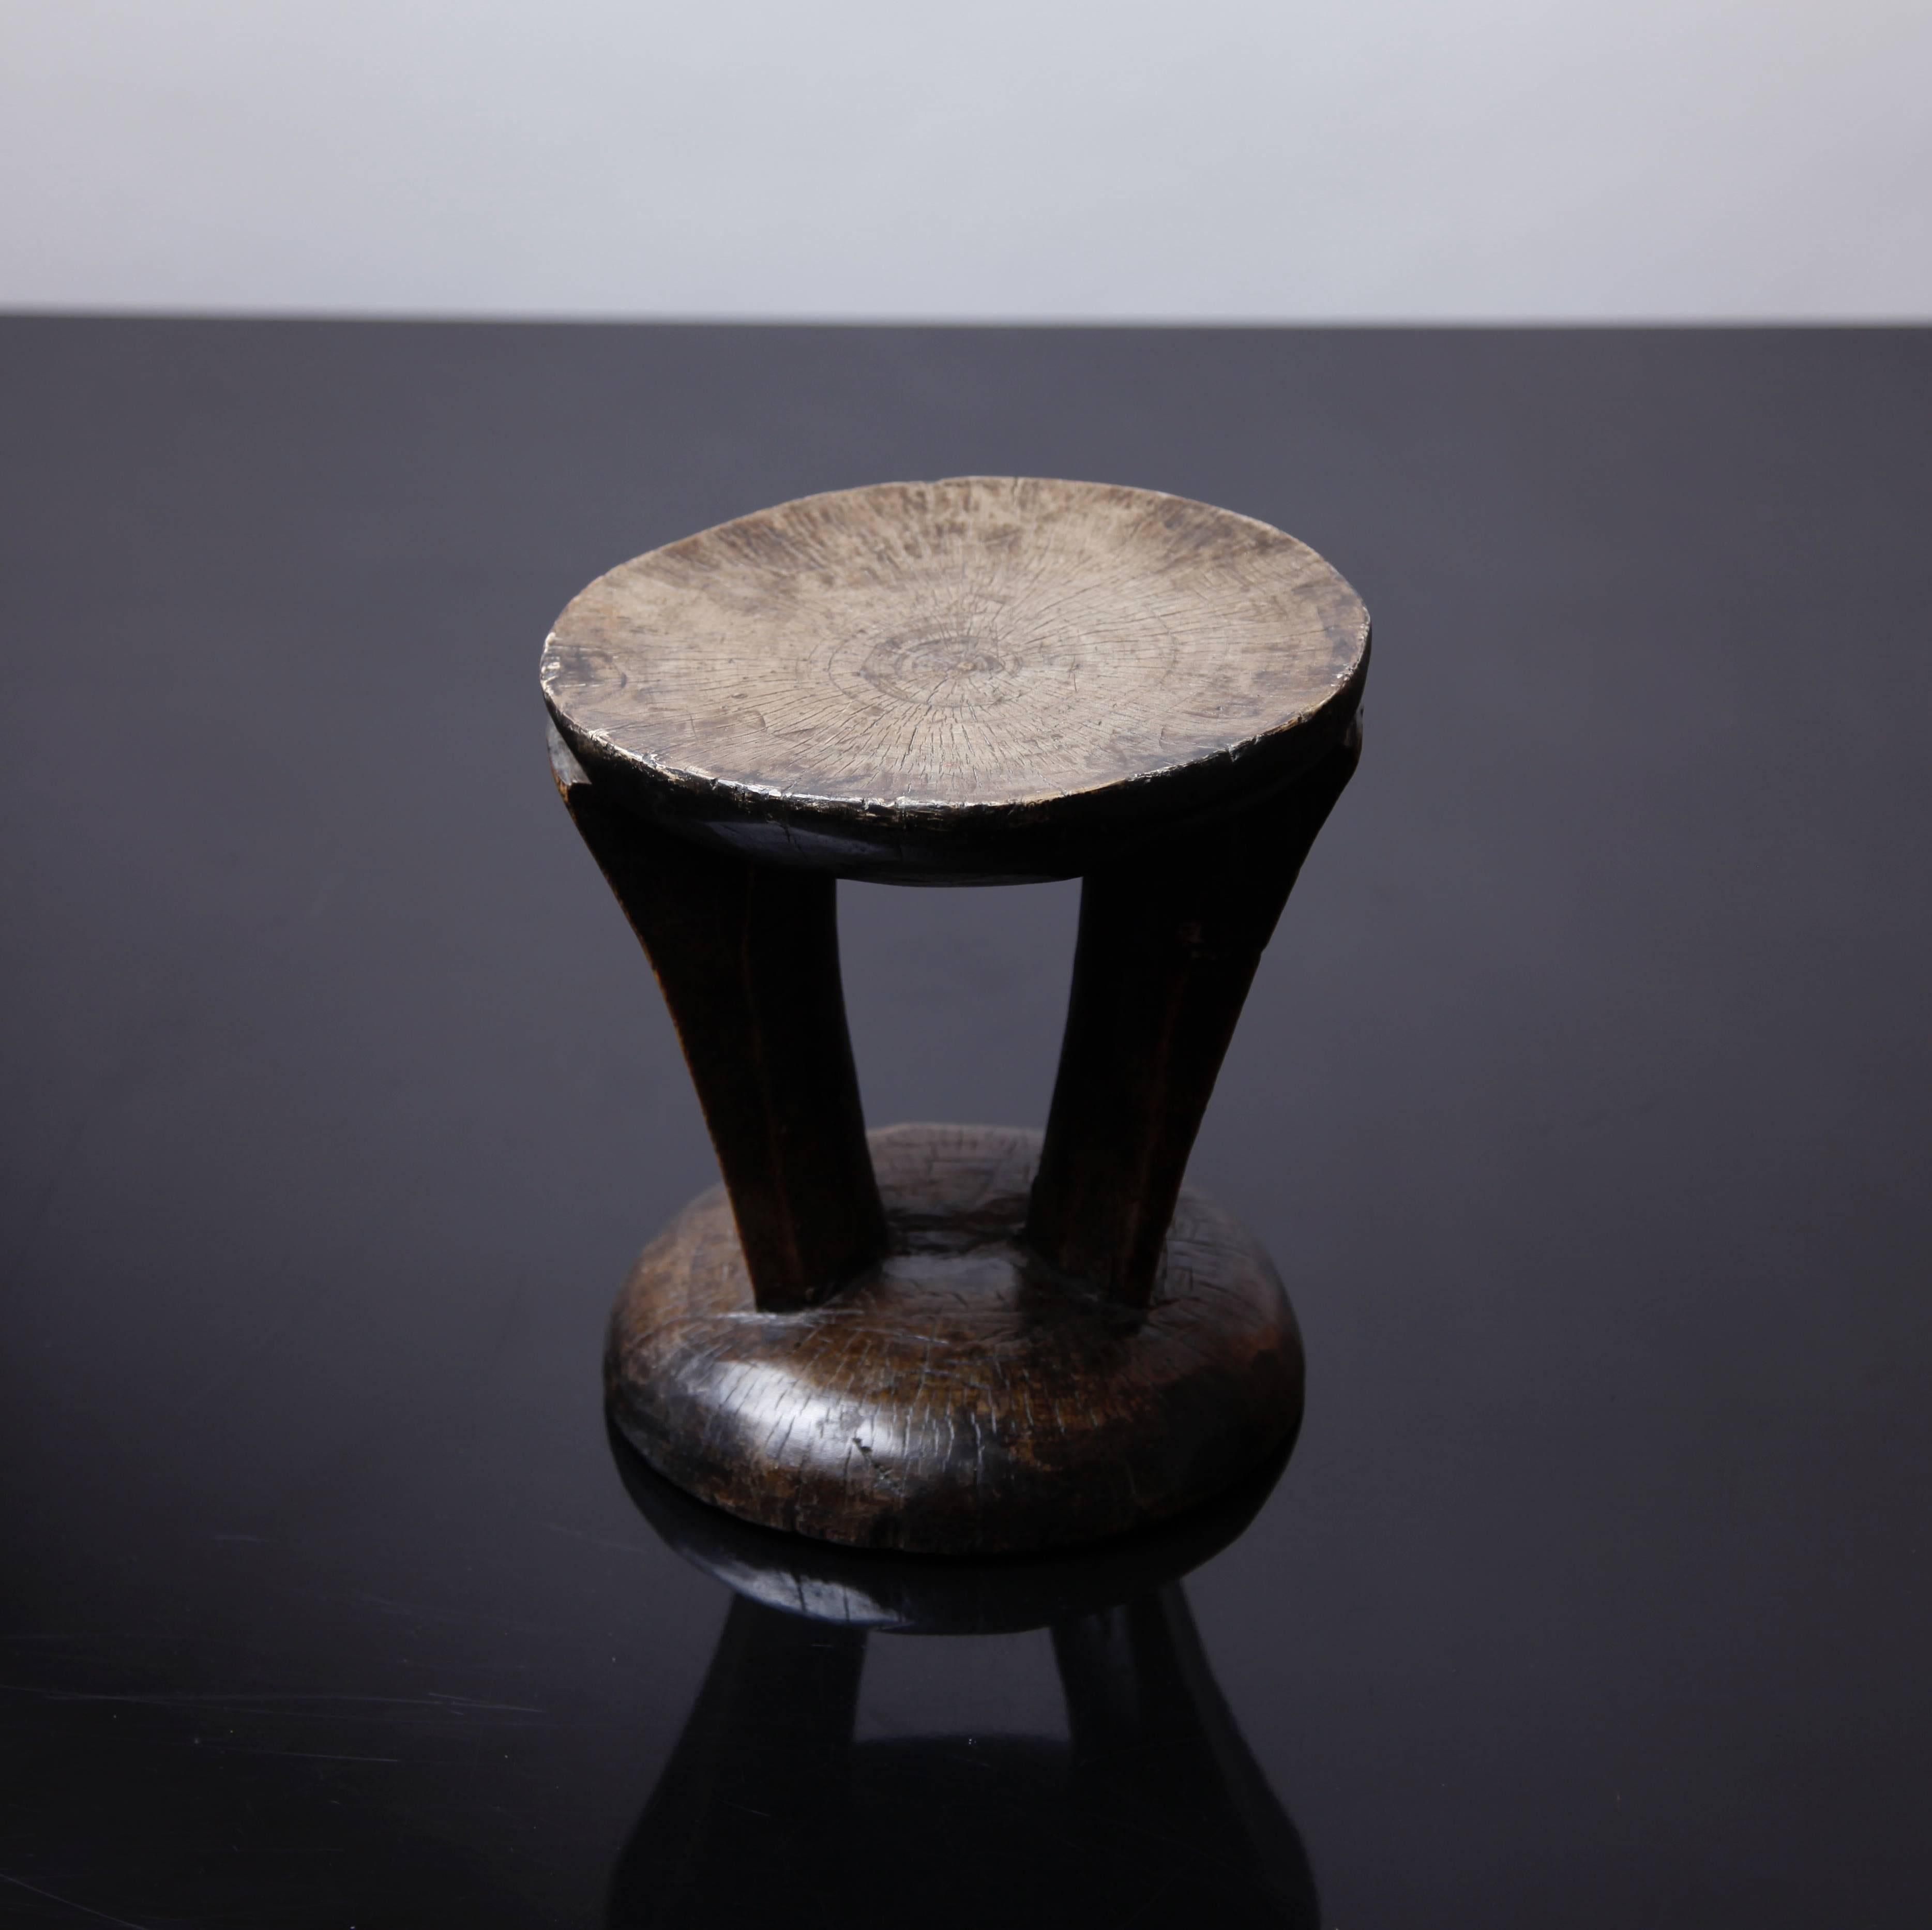 A beautifully sculpted Tonga stool, suitable as a small occasional table or a sculptural object.